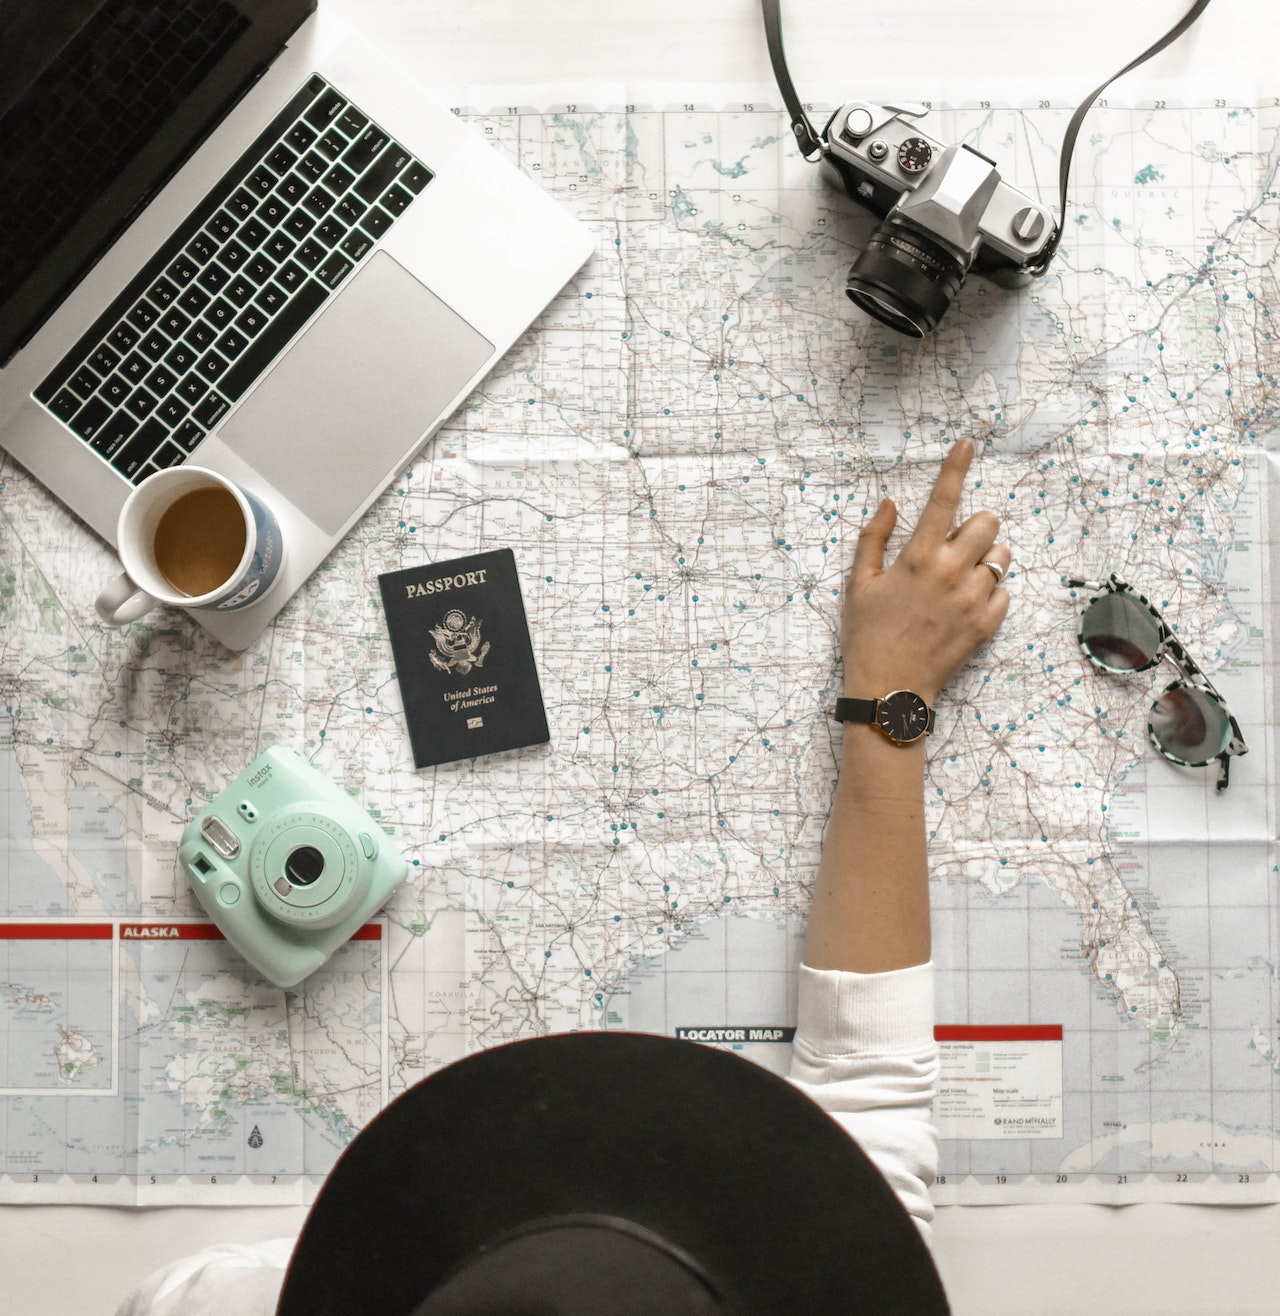 Planning your next trip